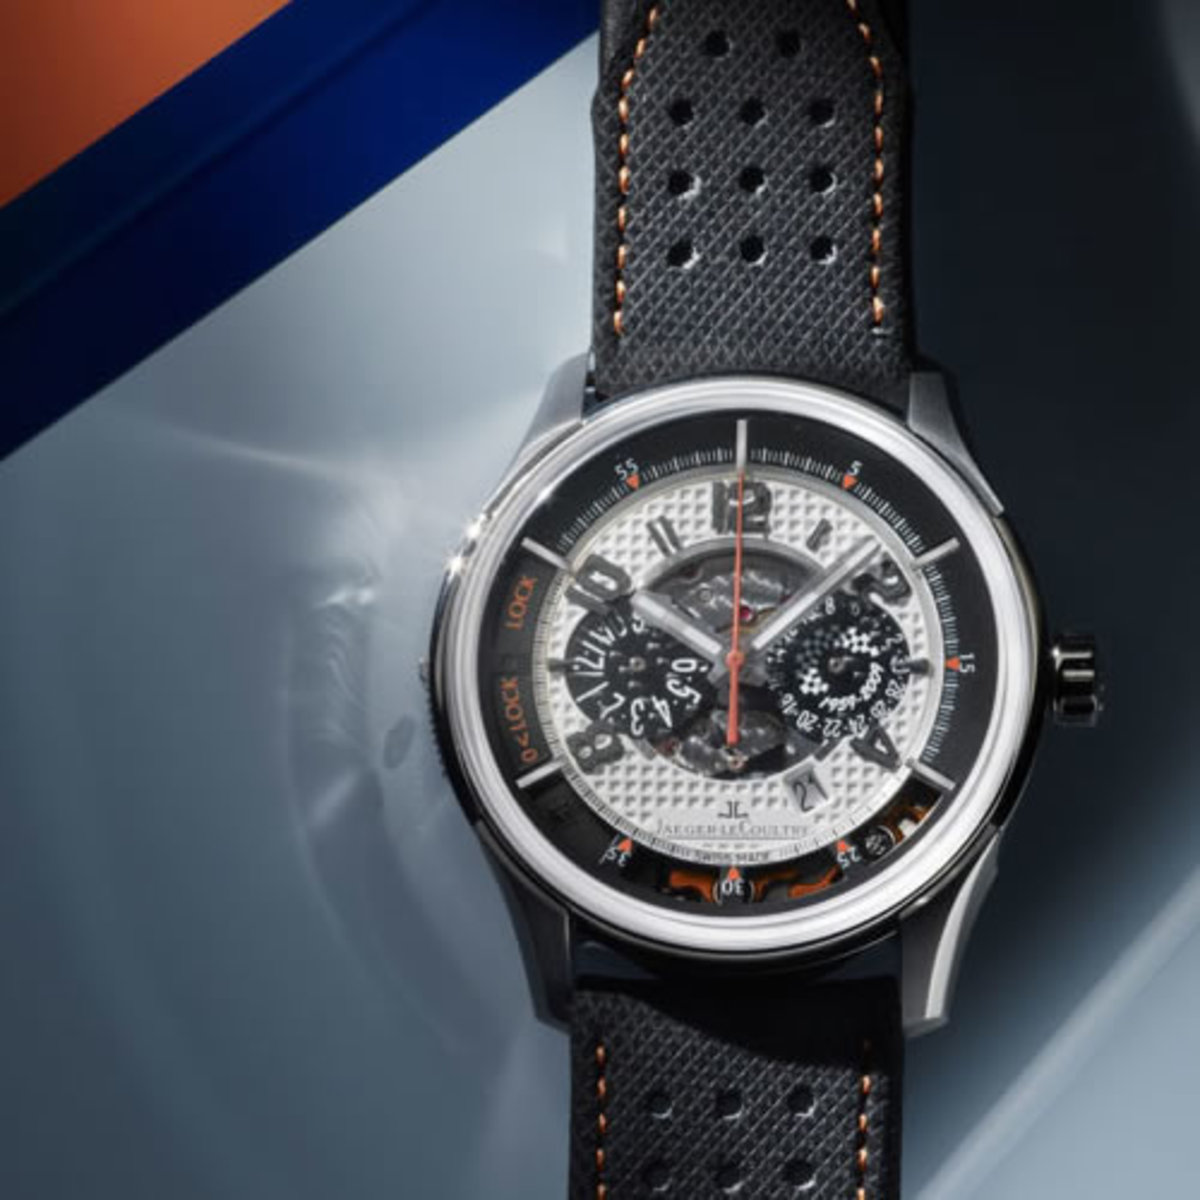 Jaeger LeCoultre Racing Chronograph AMVOX2 - Acquire